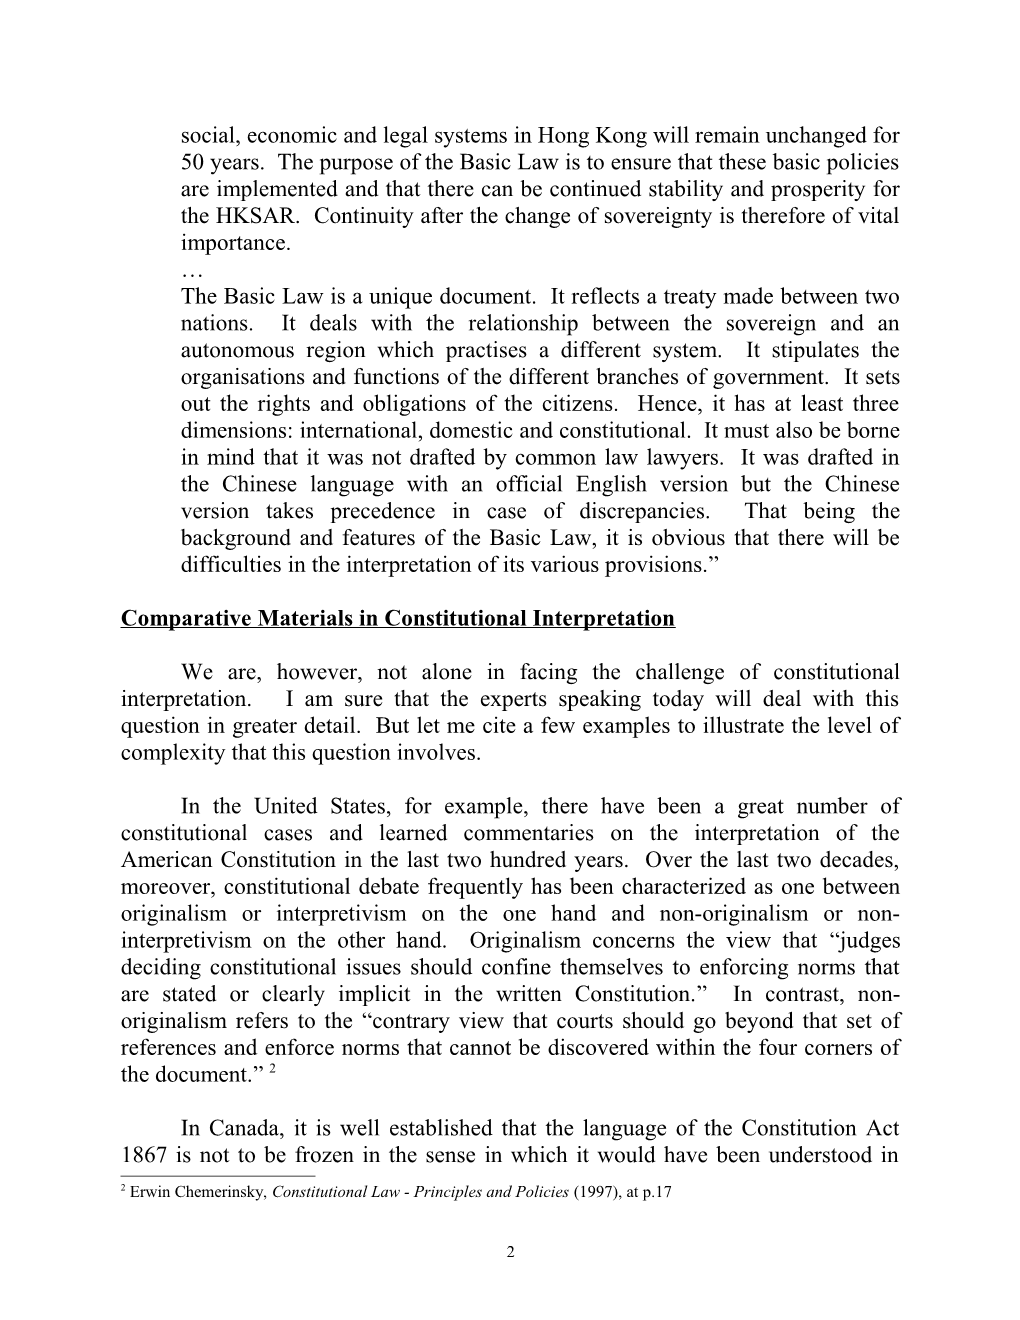 Constitutional Law Conference on Implementation of the Basic Law: a Comparative Perspective